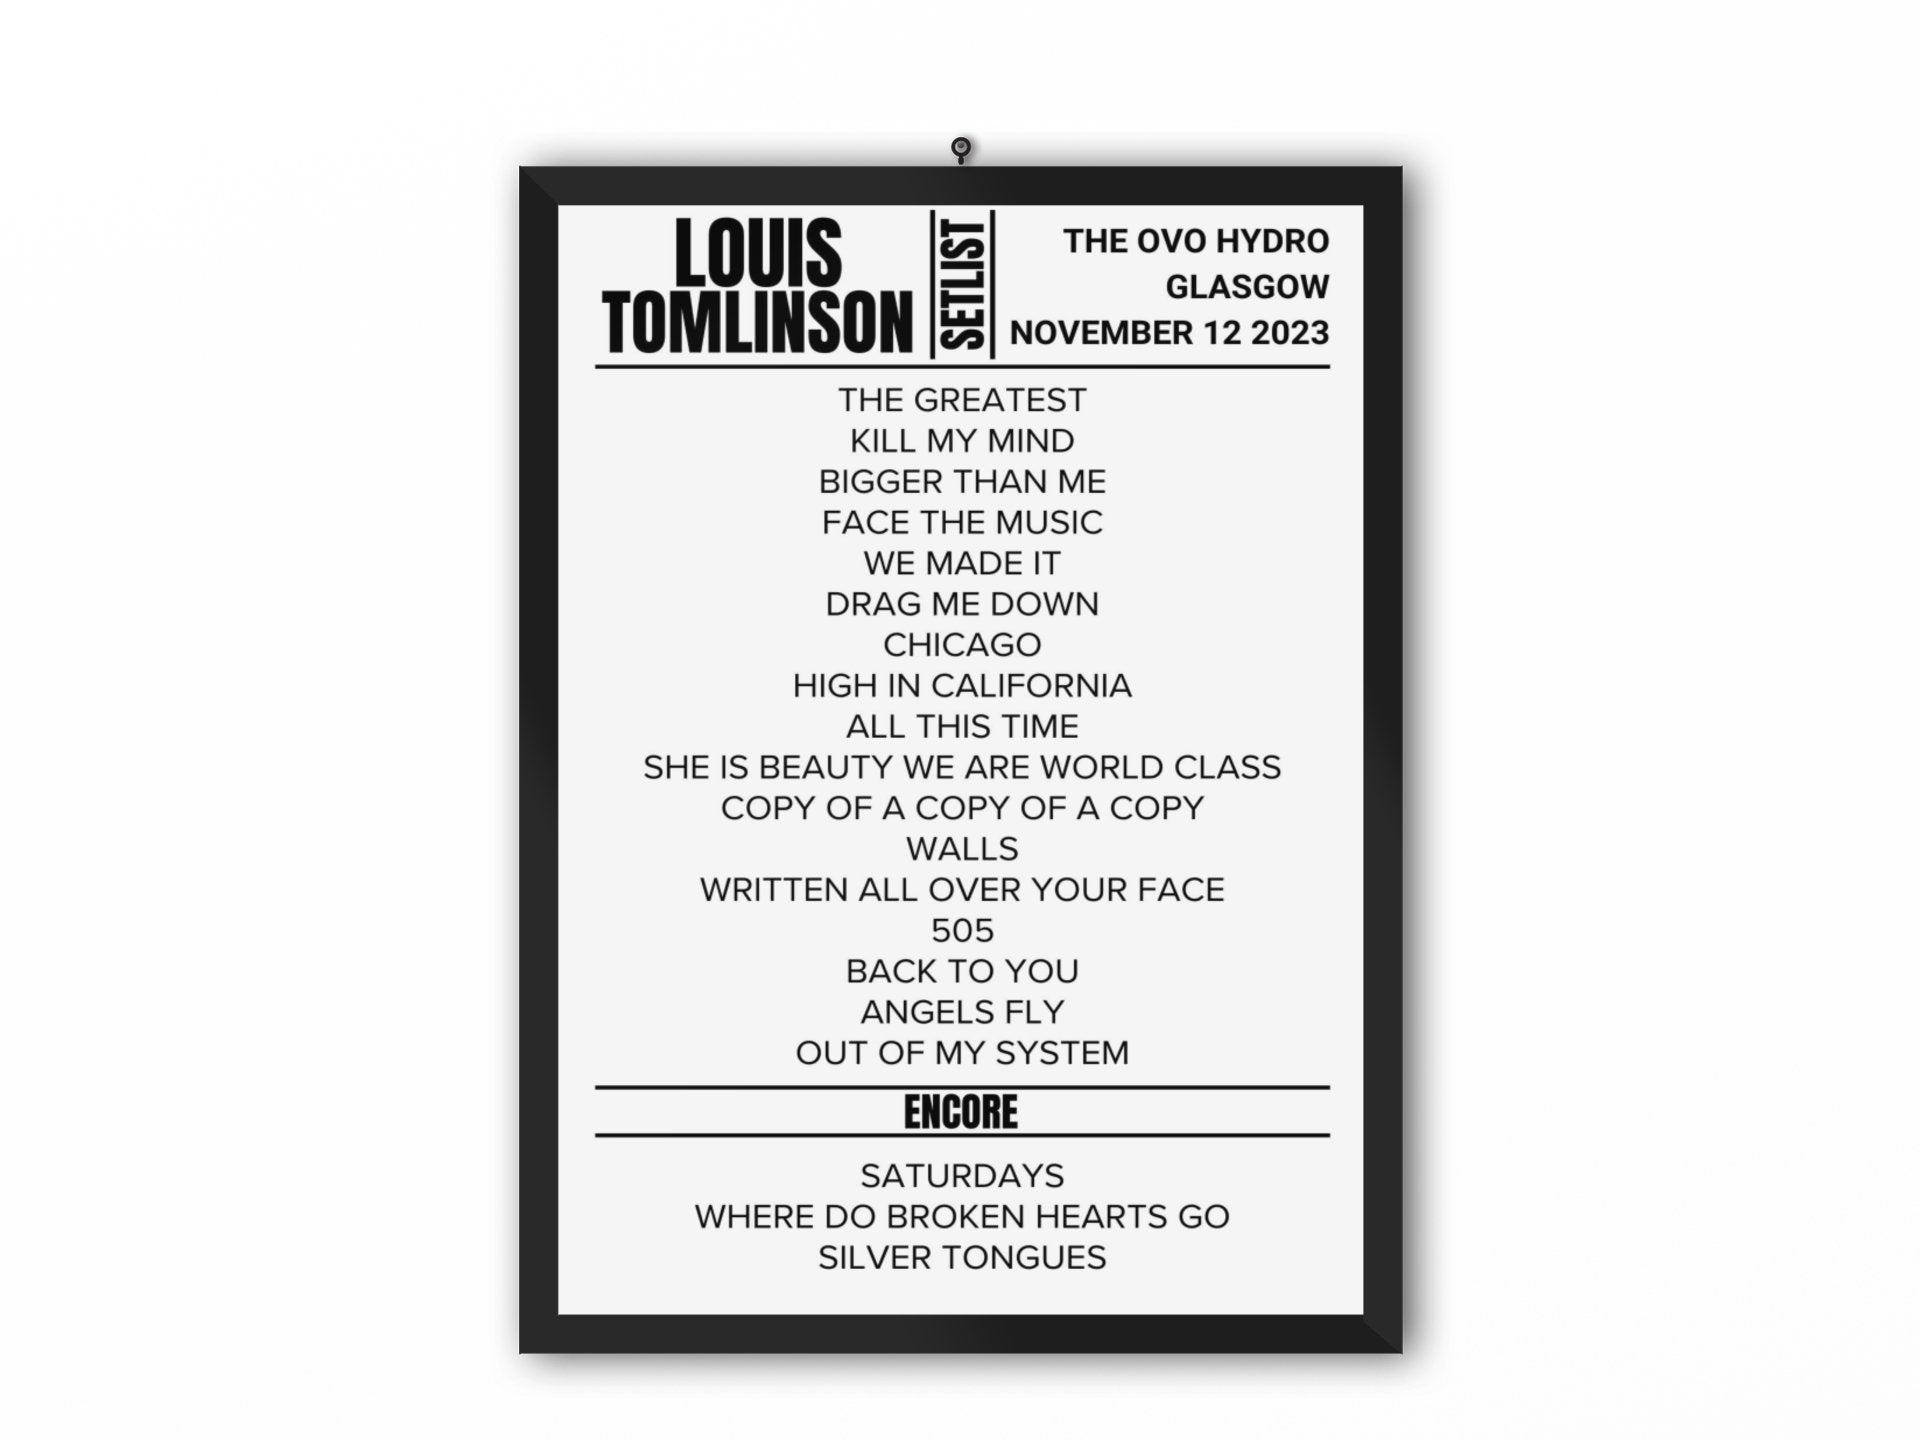 Louis Tomlinson store - Products